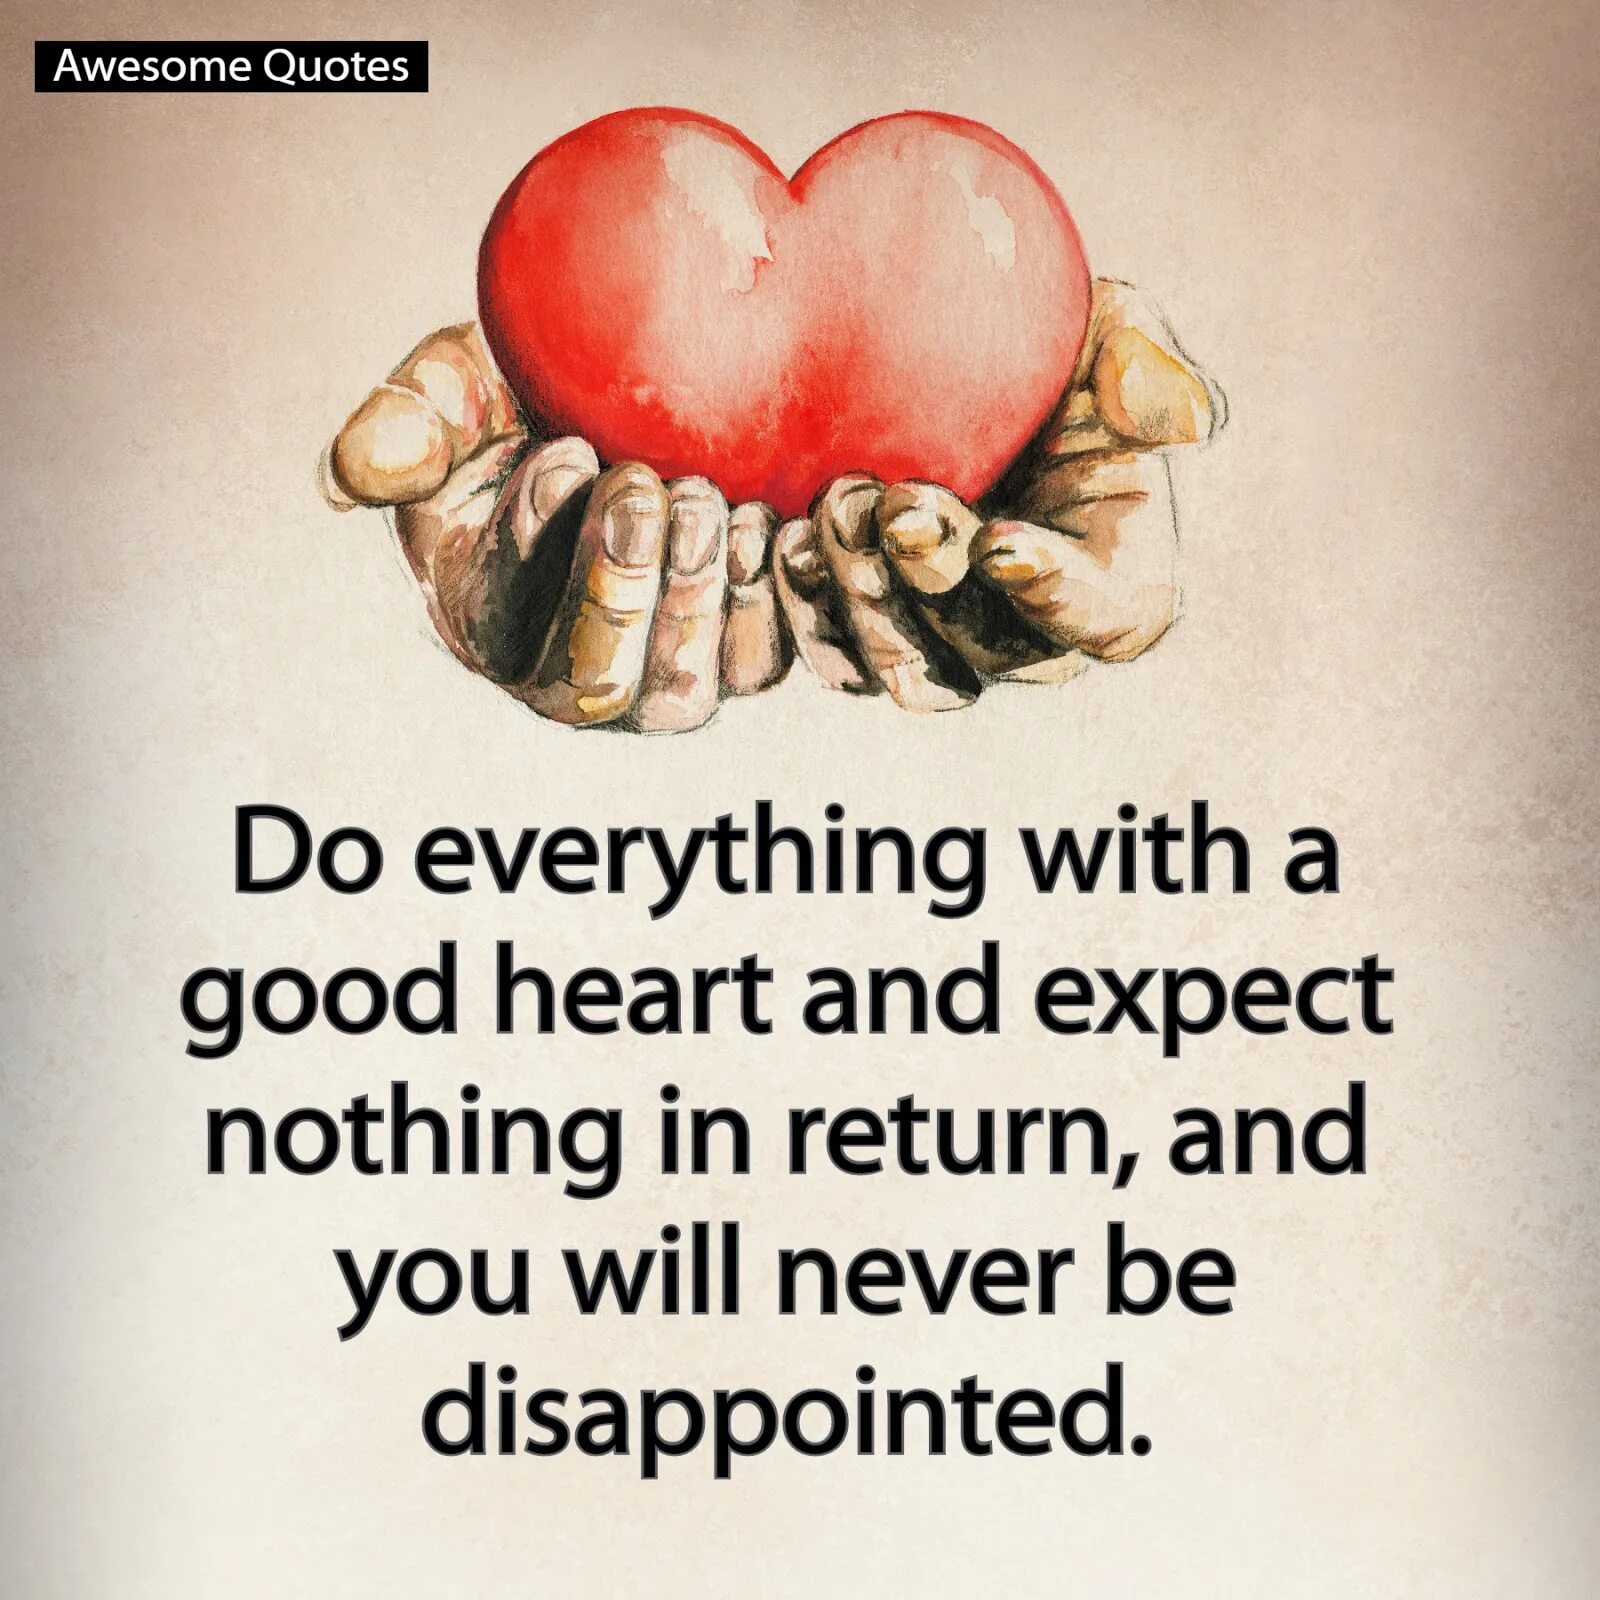 Good Heart. Out of the goodness of your Heart. Expect nothing and you will never be disappointed. Expect nothing картинки. Best of your heart